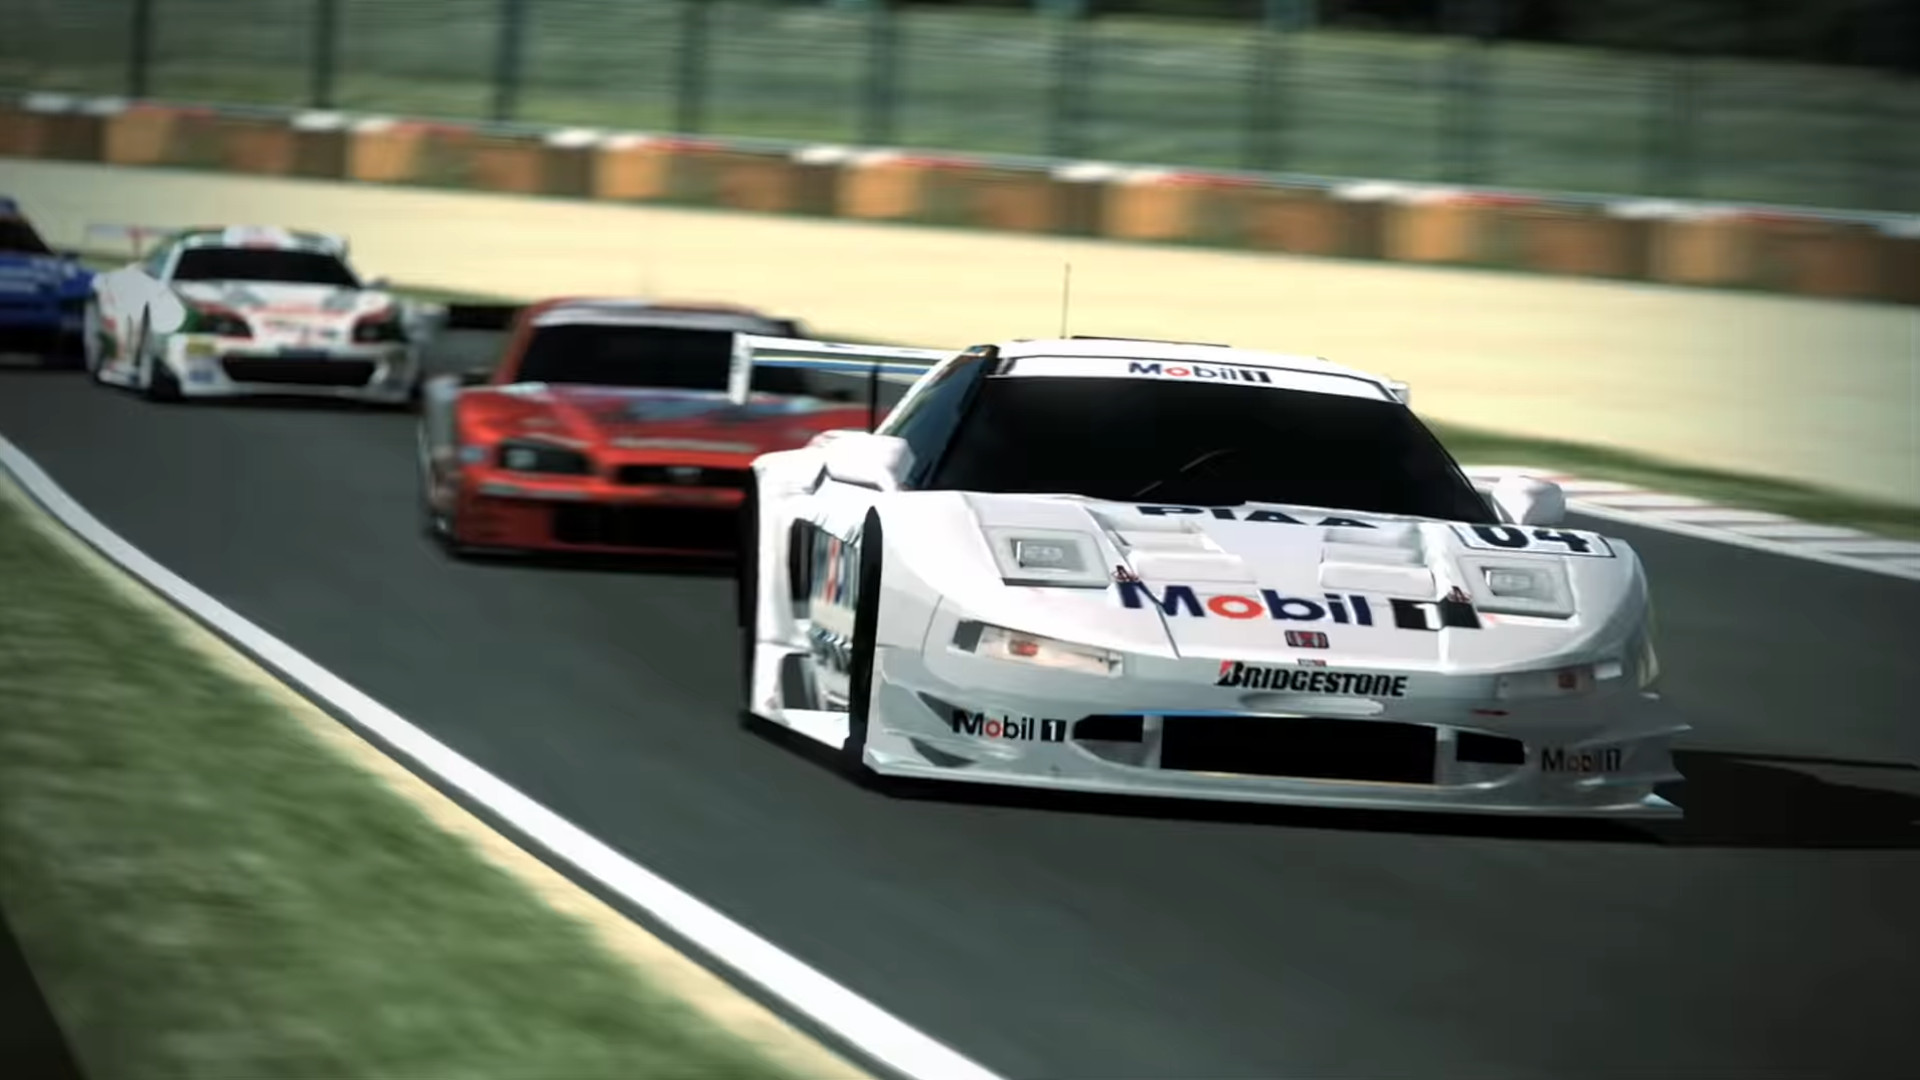 Video Game Review: 'Gran Turismo' goes slightly off track in PSP version